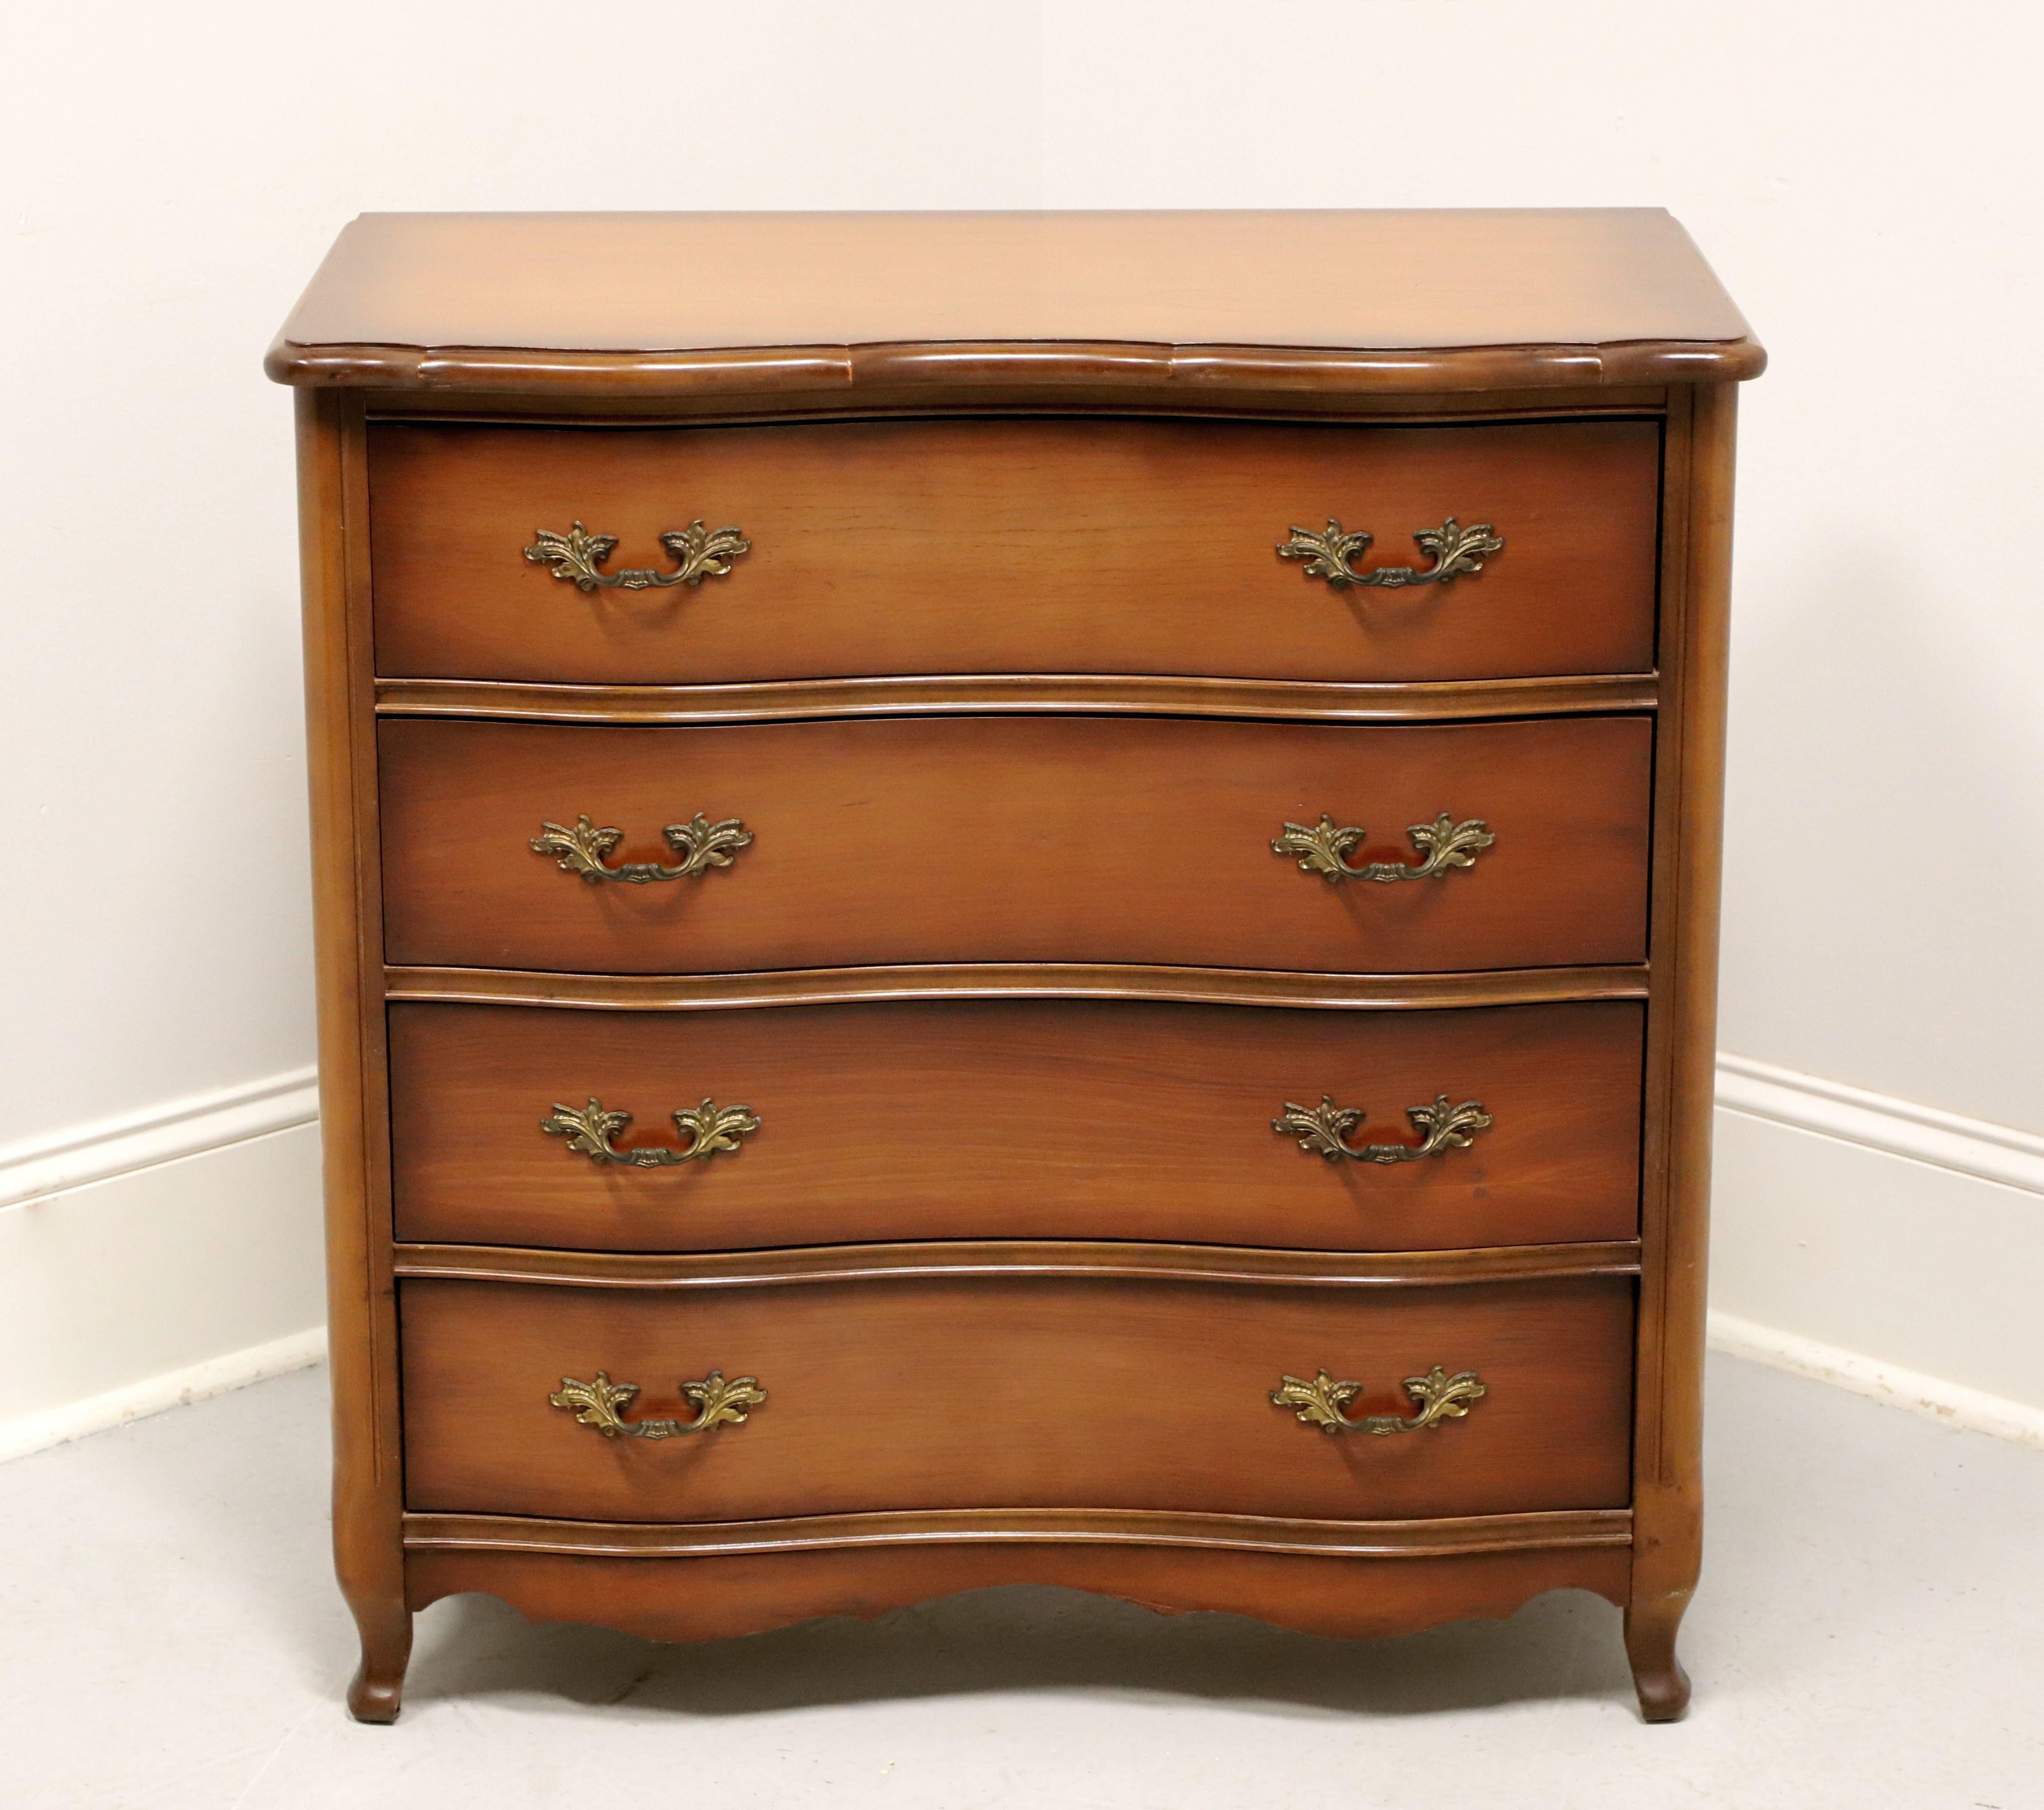 A French Provincial style bachelor chest, unbranded. Cherry wood with brass hardware, ogee edge to top, serpentine front, carved apron, and scroll front feet. Features four drawers of dovetail construction. Made in the USA, in the mid 20th century.